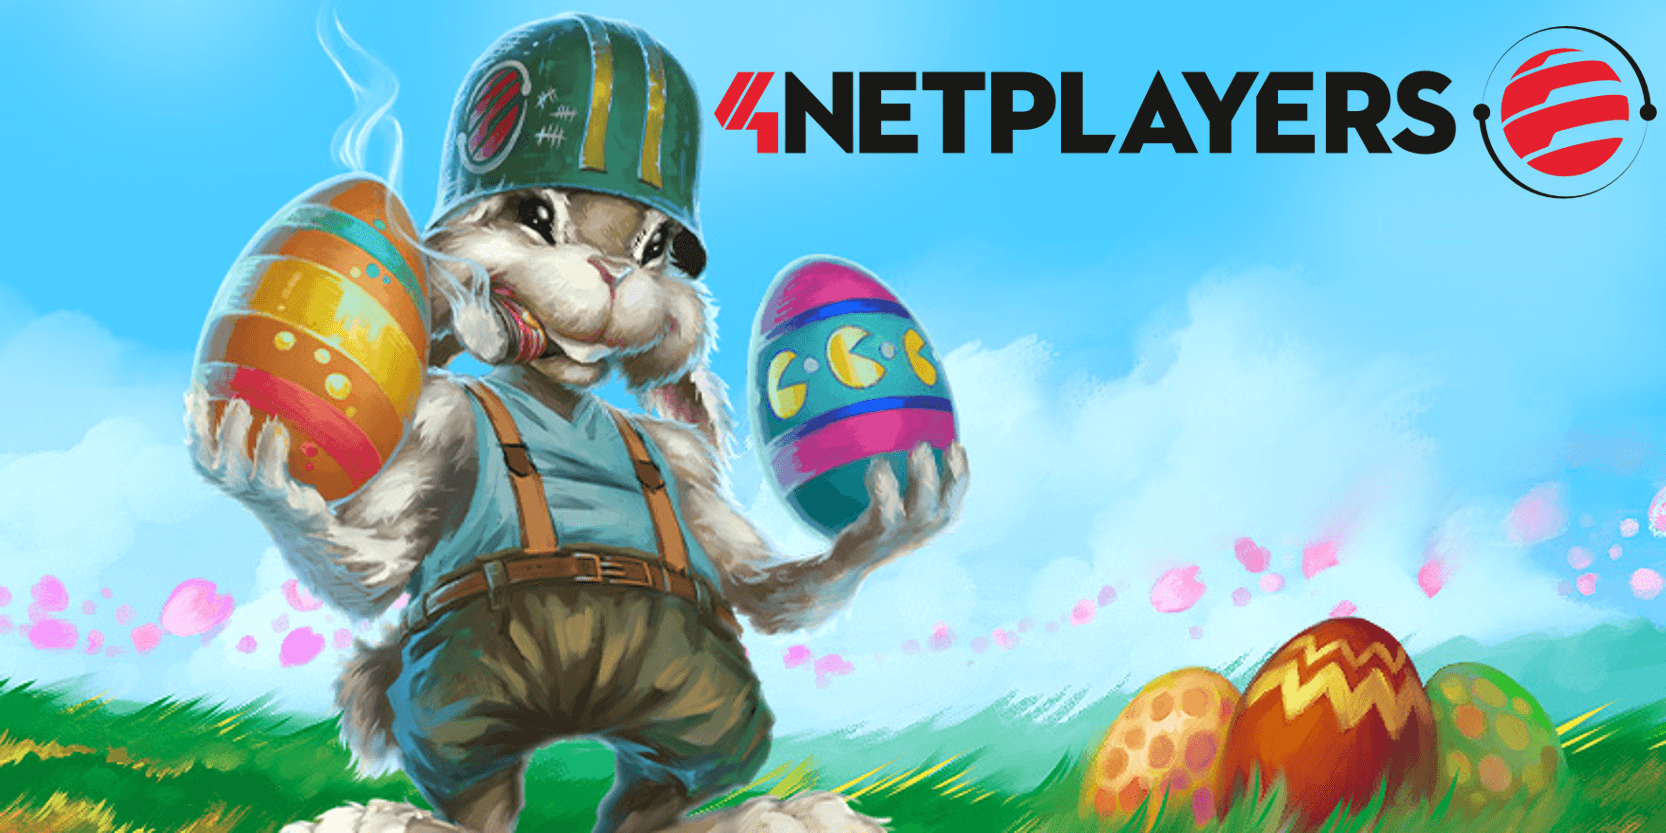 Double the Fun This Easter with 4NetPlayers' Double Slot Madness Promotion